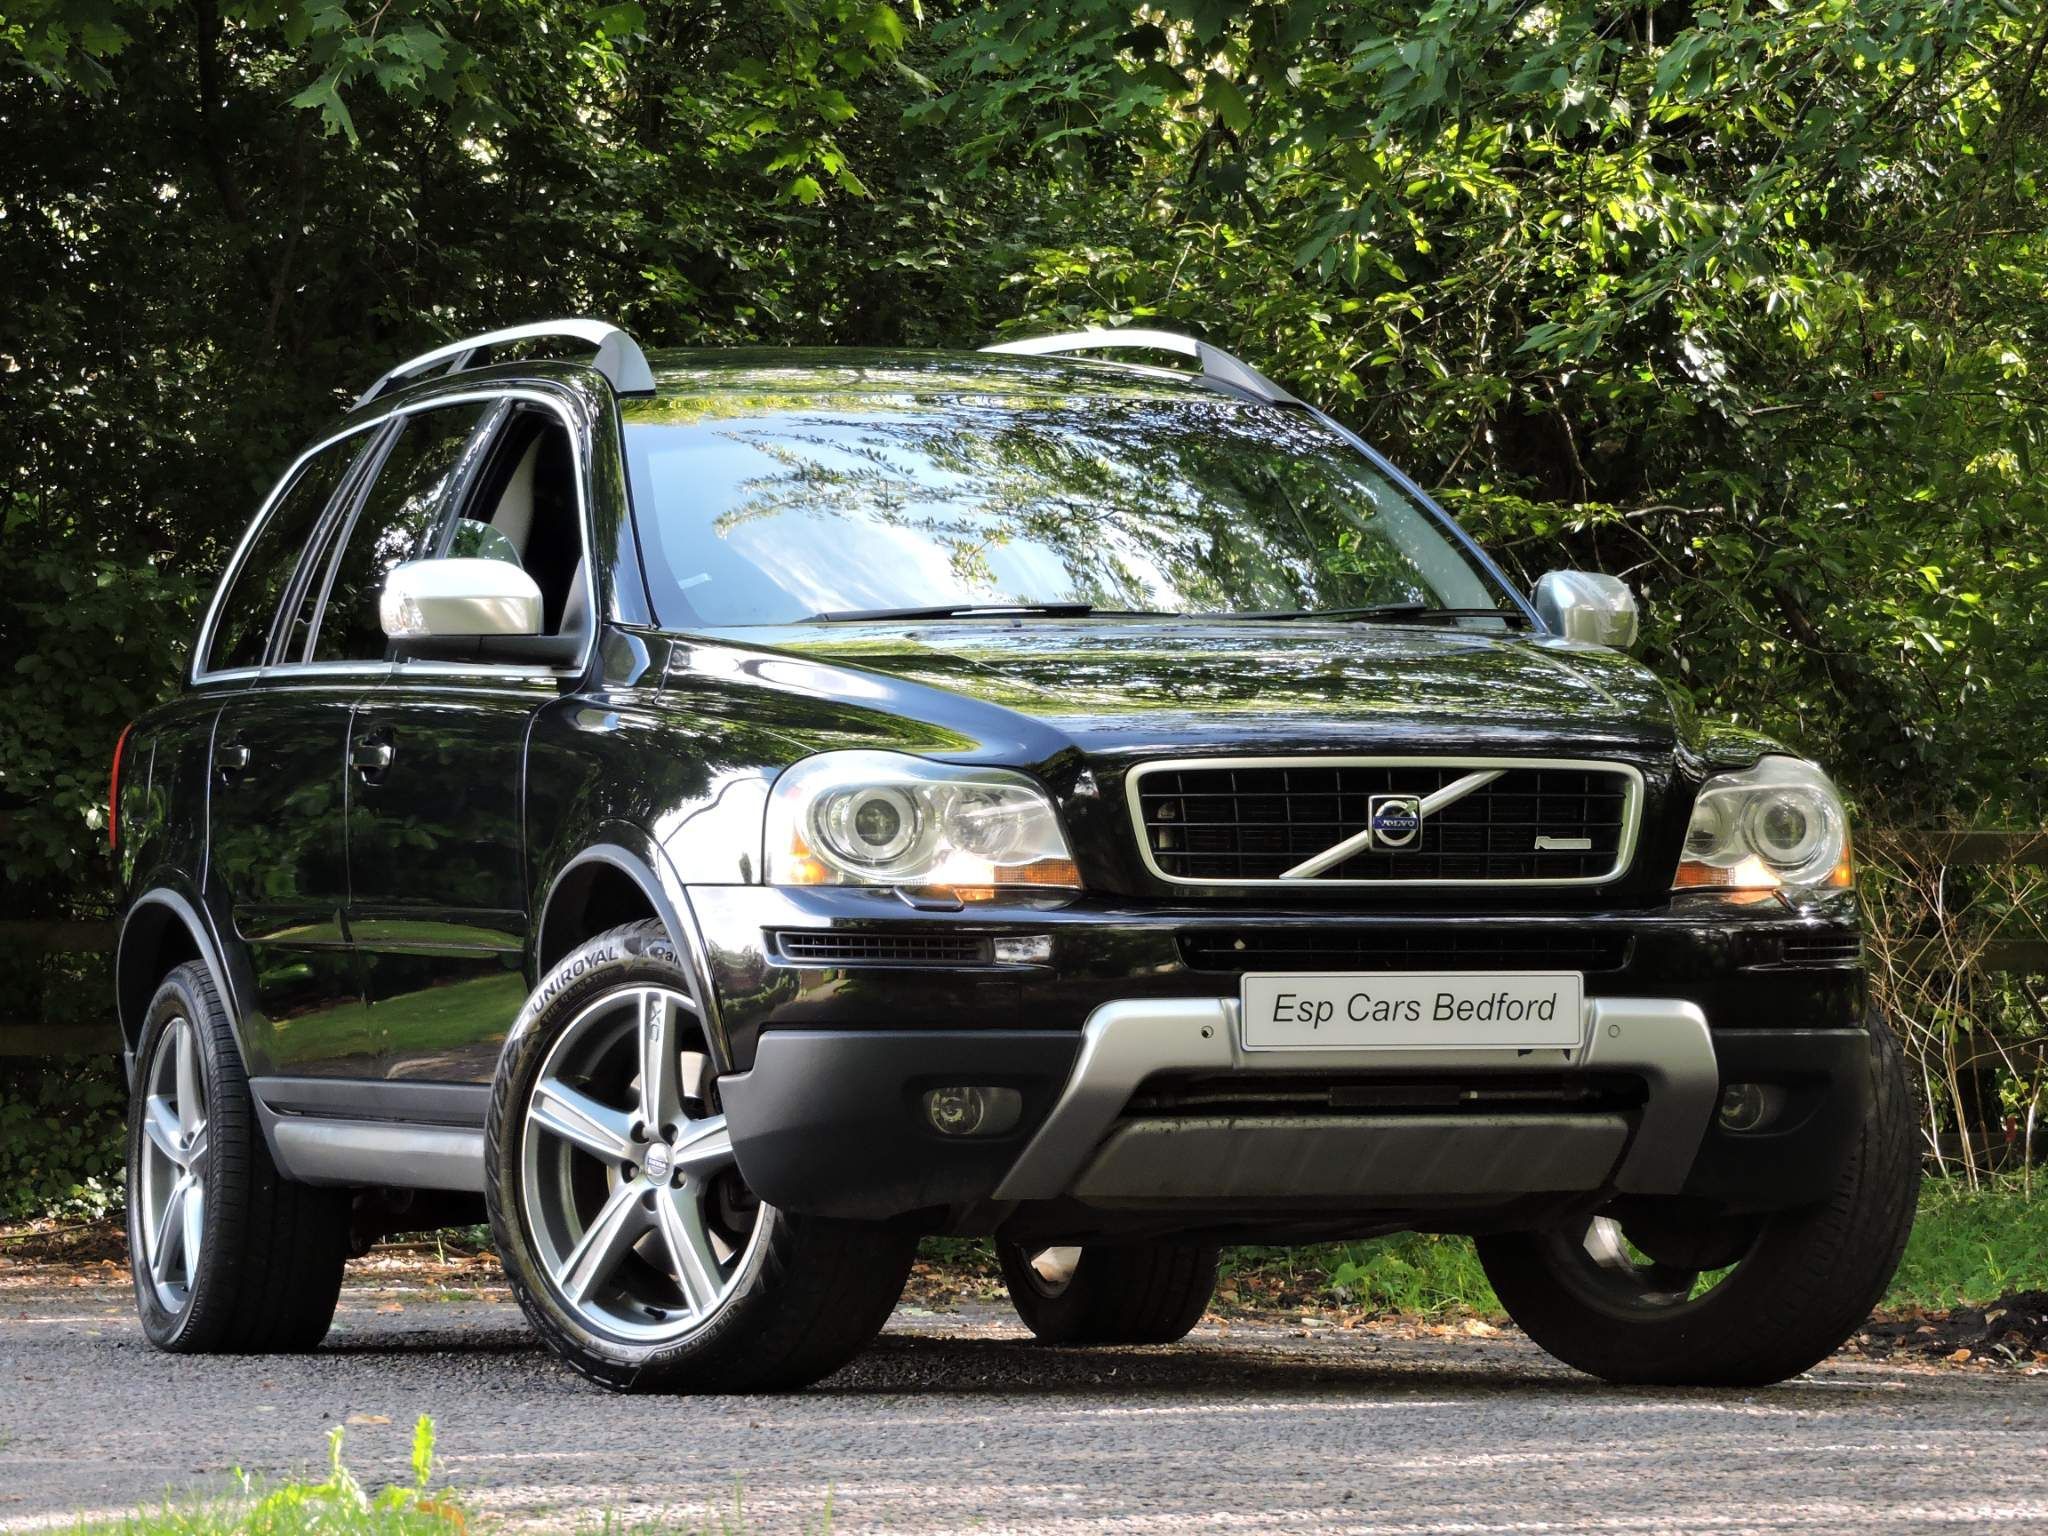 Volvo XC90 2.4 D5 R-Design SE Geartronic AWD 5dr - £8790